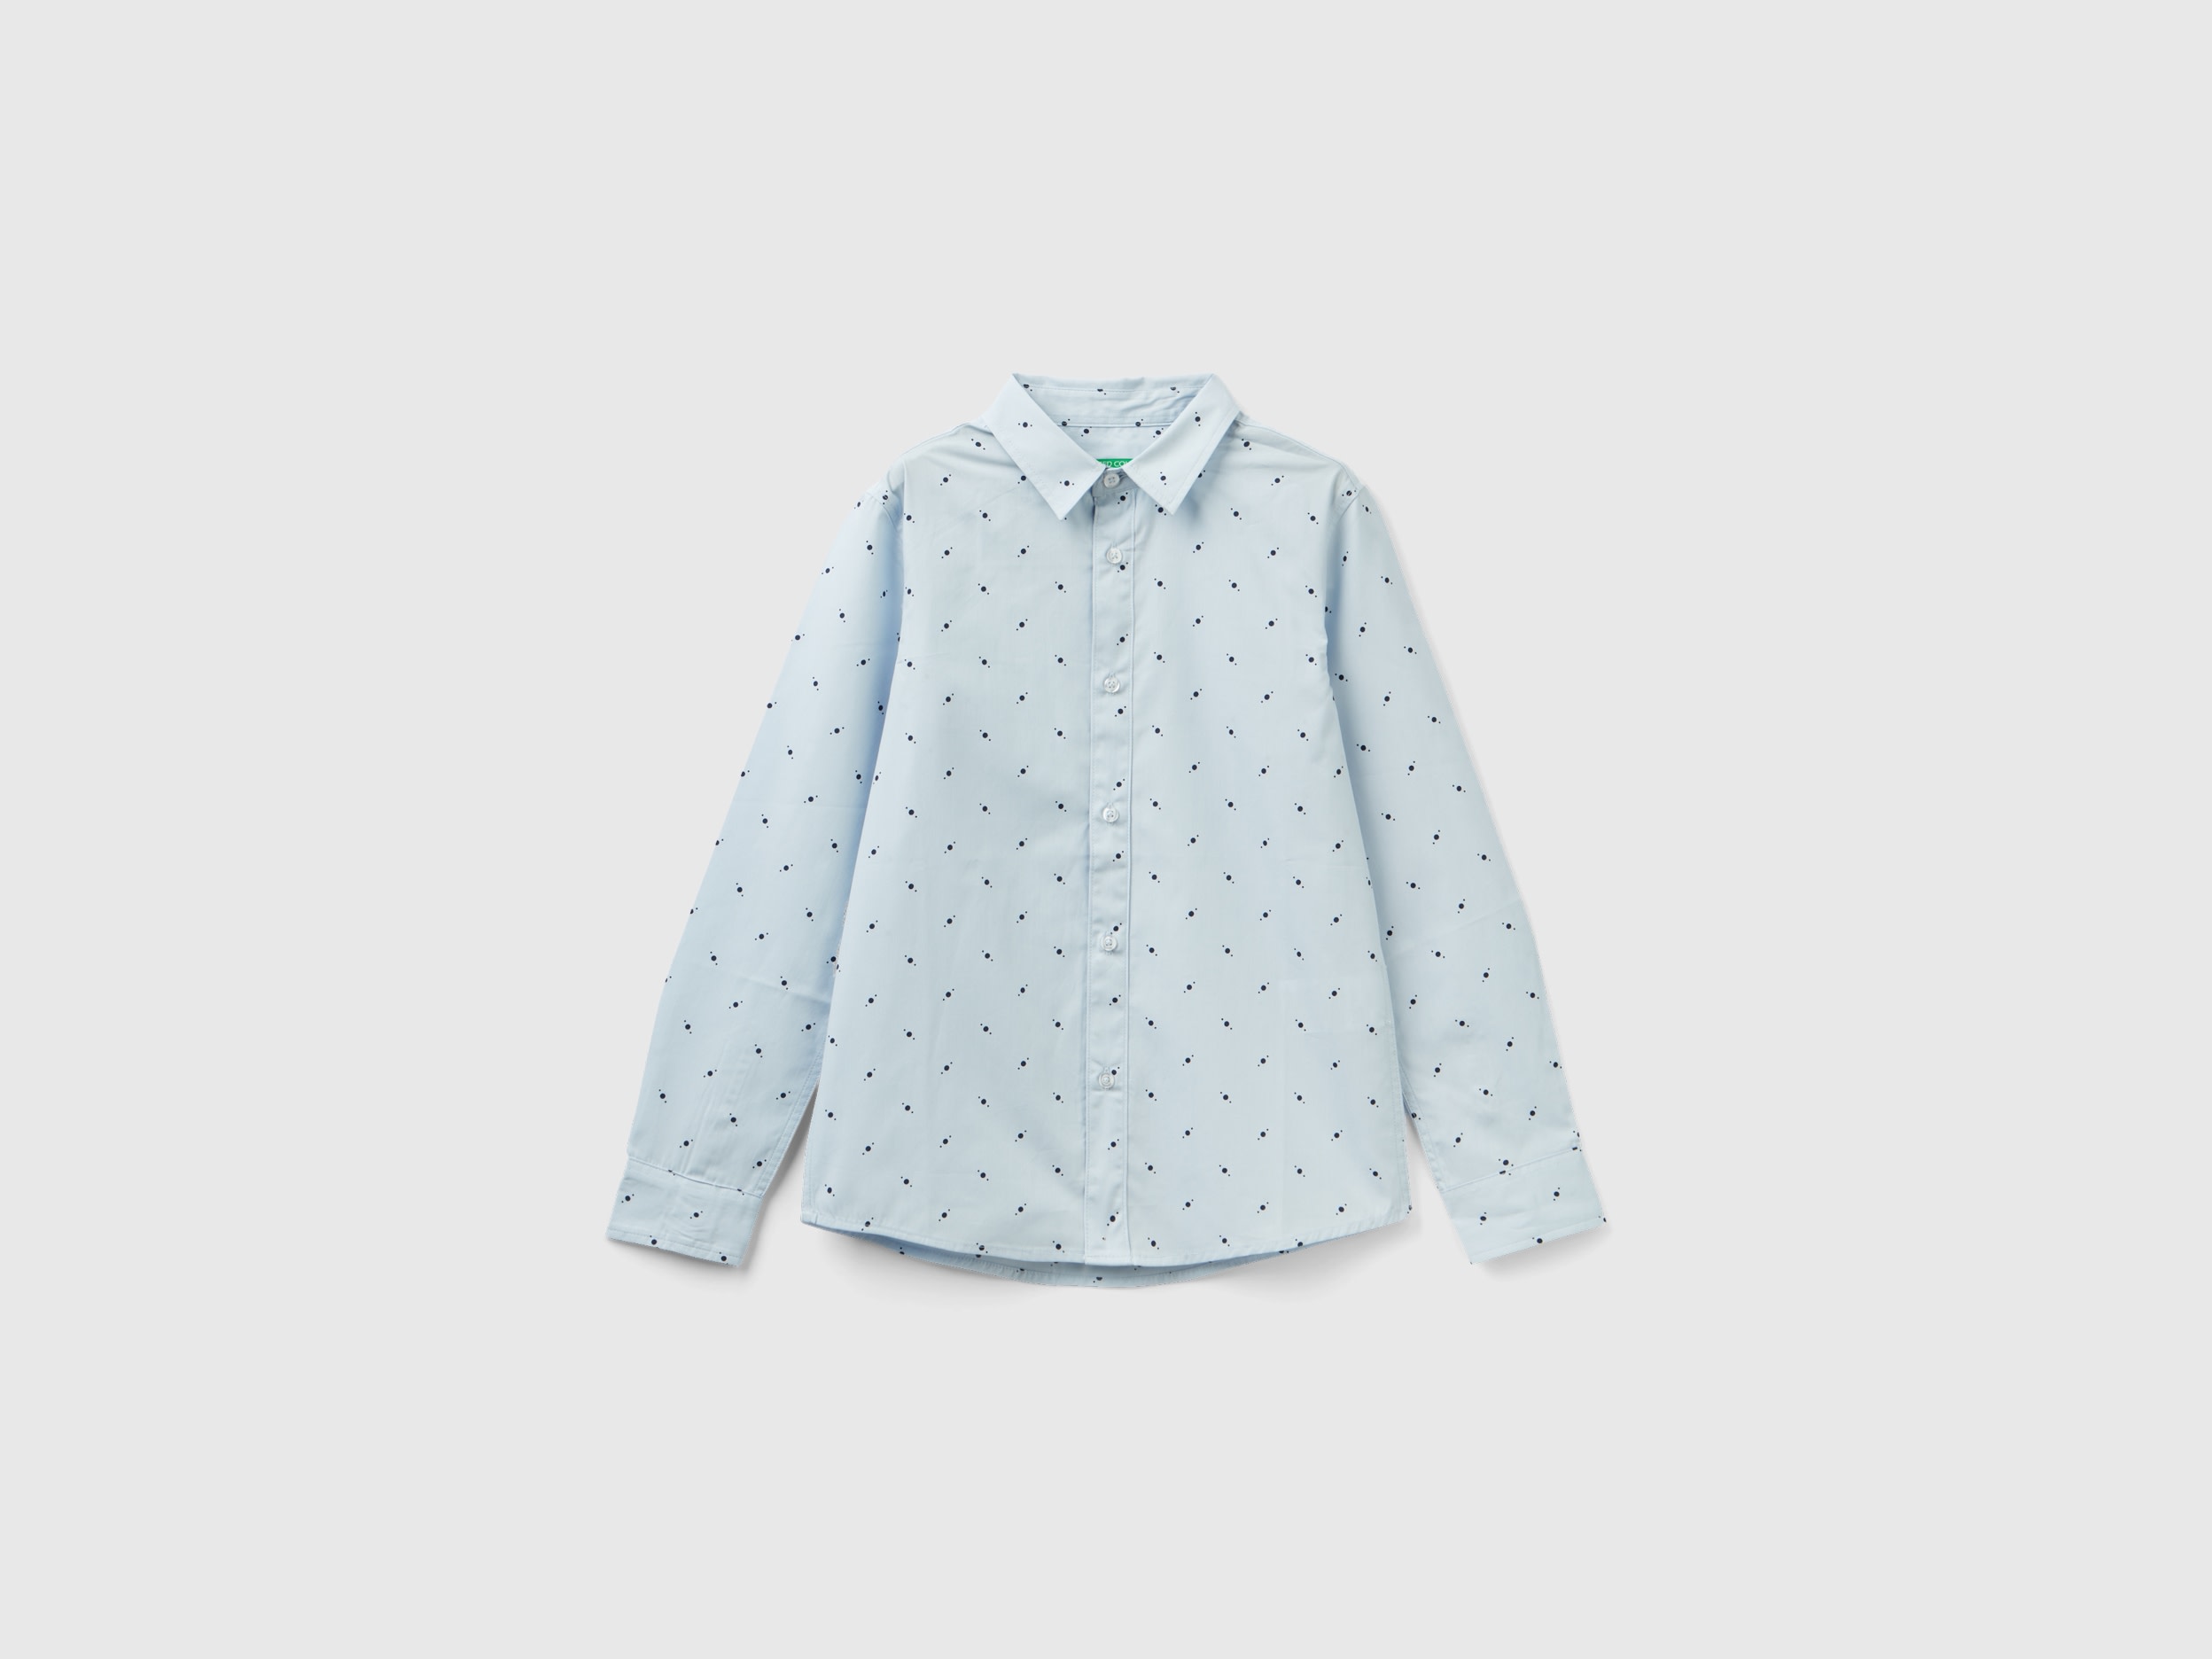 Benetton, Slim Fit Shirt With Micro Pattern, size S, Sky Blue, Kids